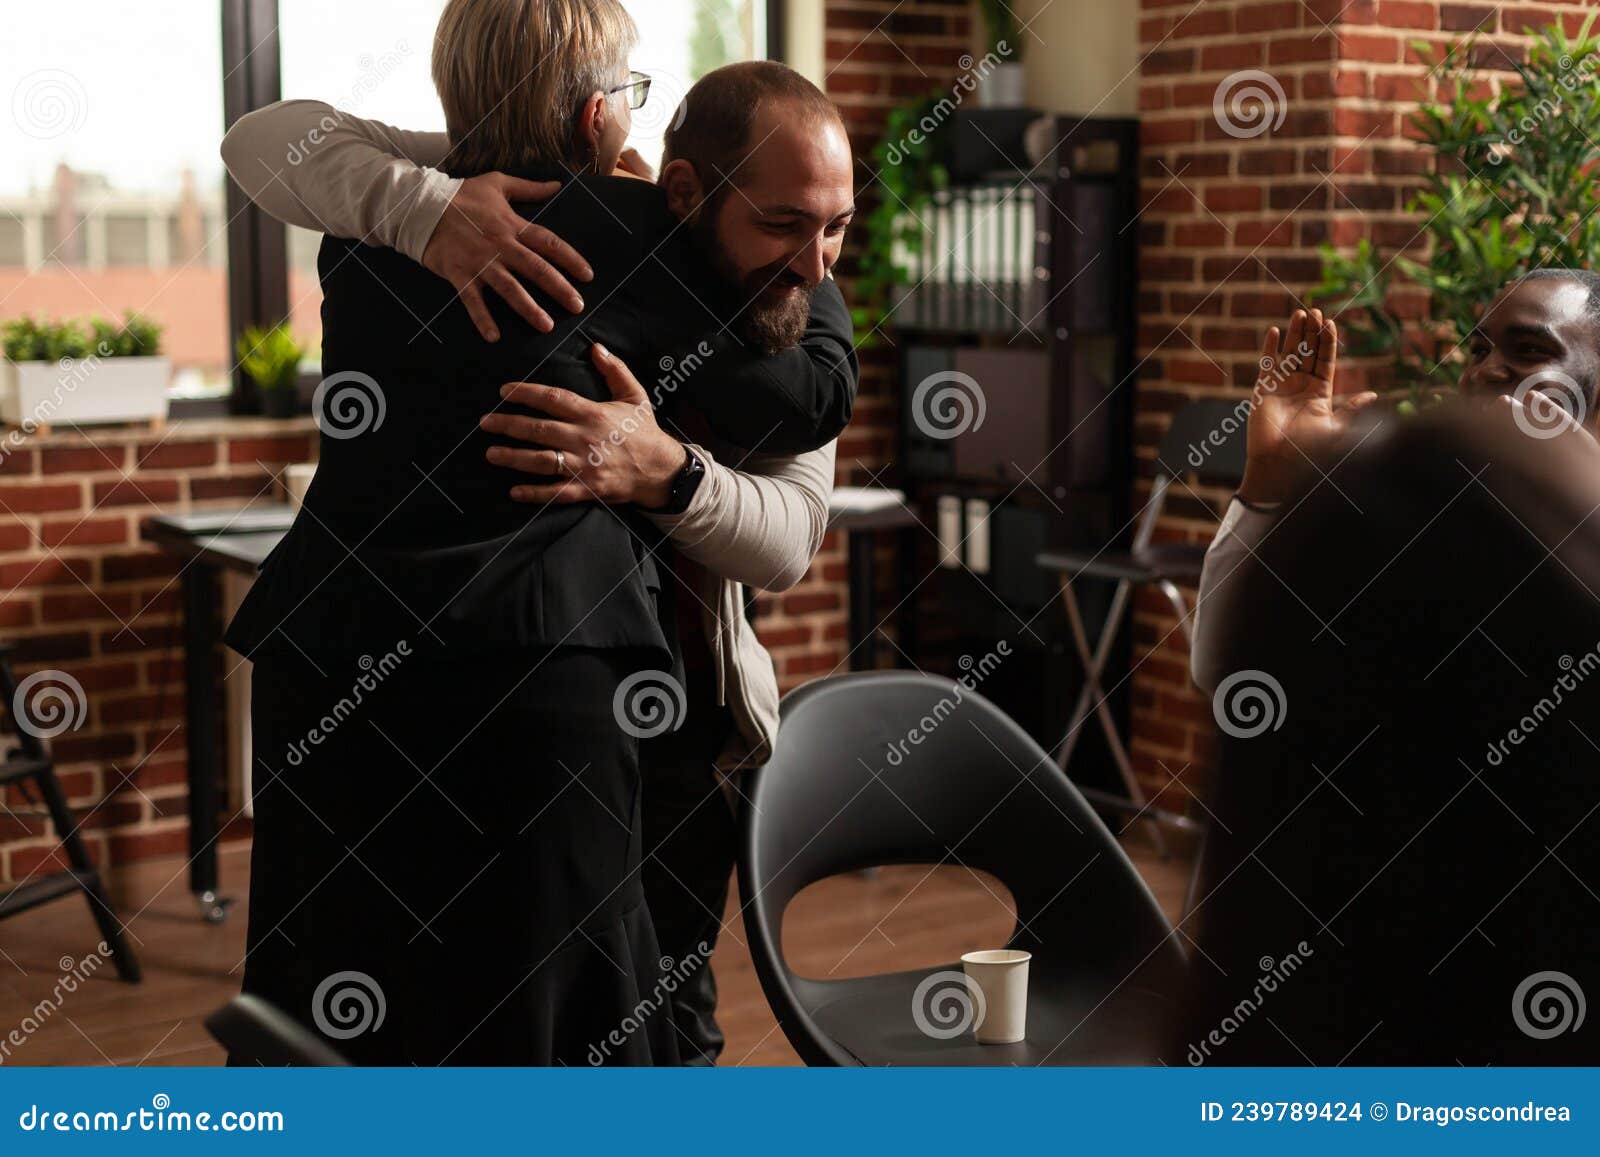 man and psychologist hugging after sharing addiction progress with aa meeting group